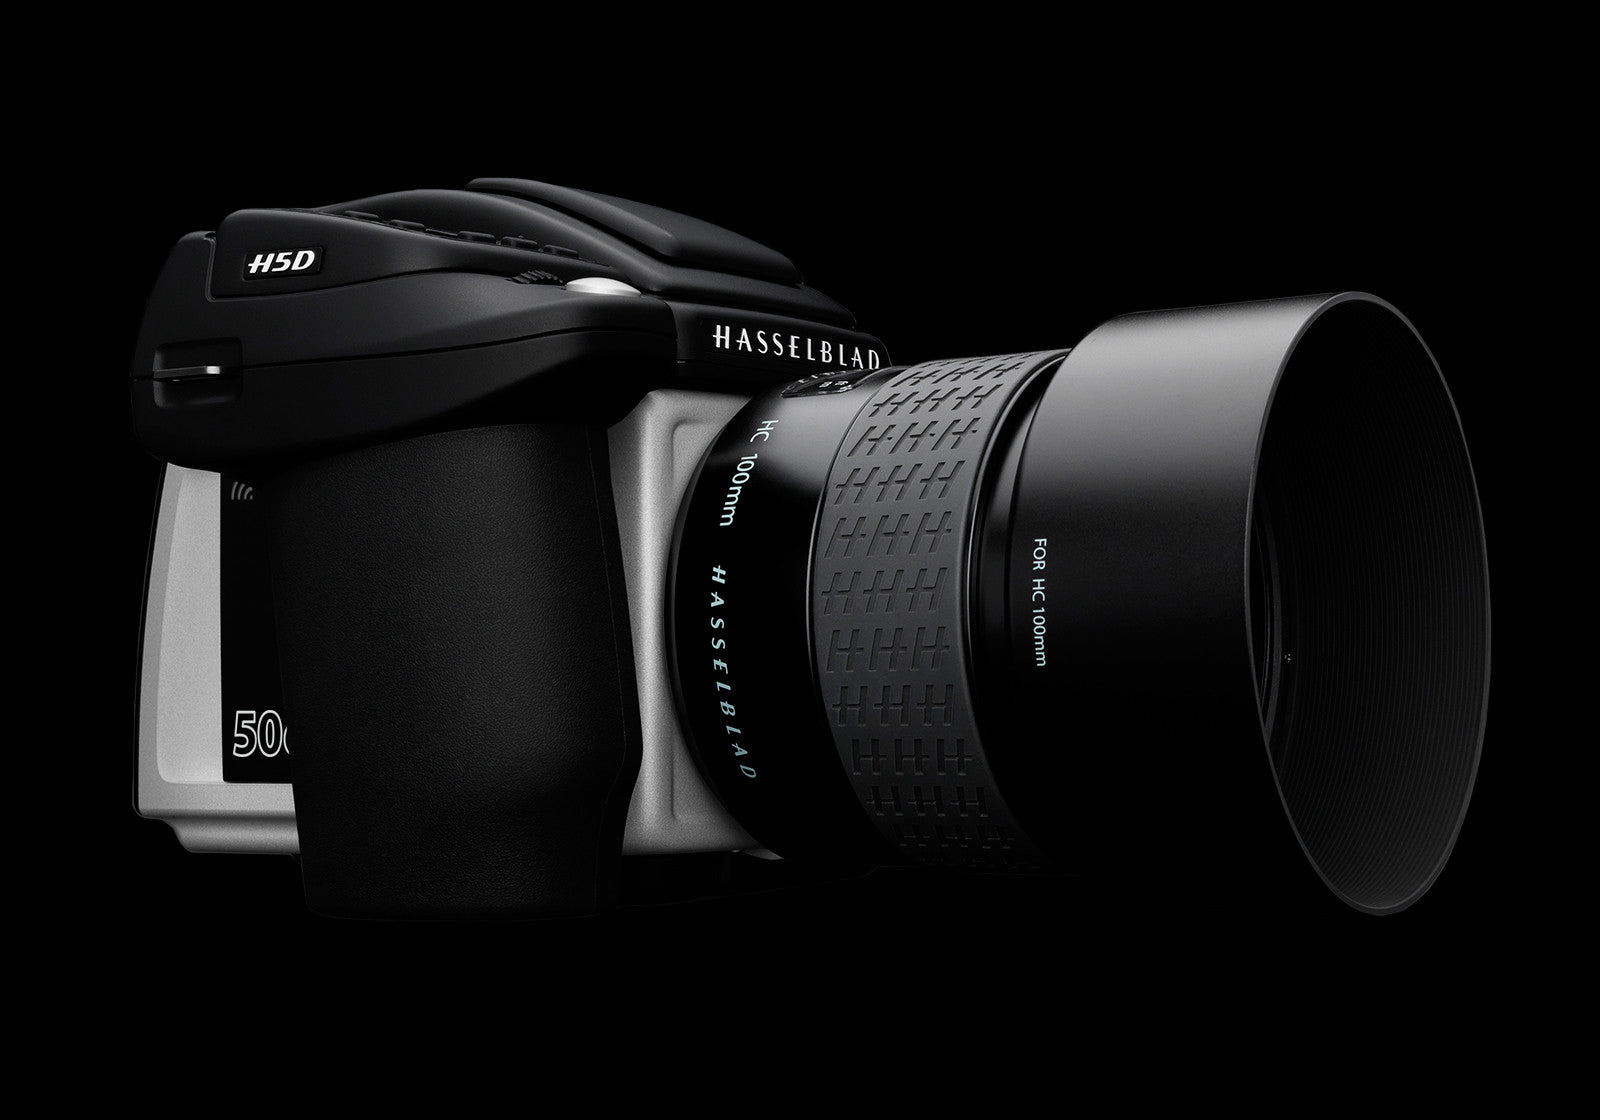 Hasselblad H5D-50c WiFi Medium Format Digital Camera with 80mm f2.8 HC AF Lens, discontinued, Hasselblad - Pictureline  - 1